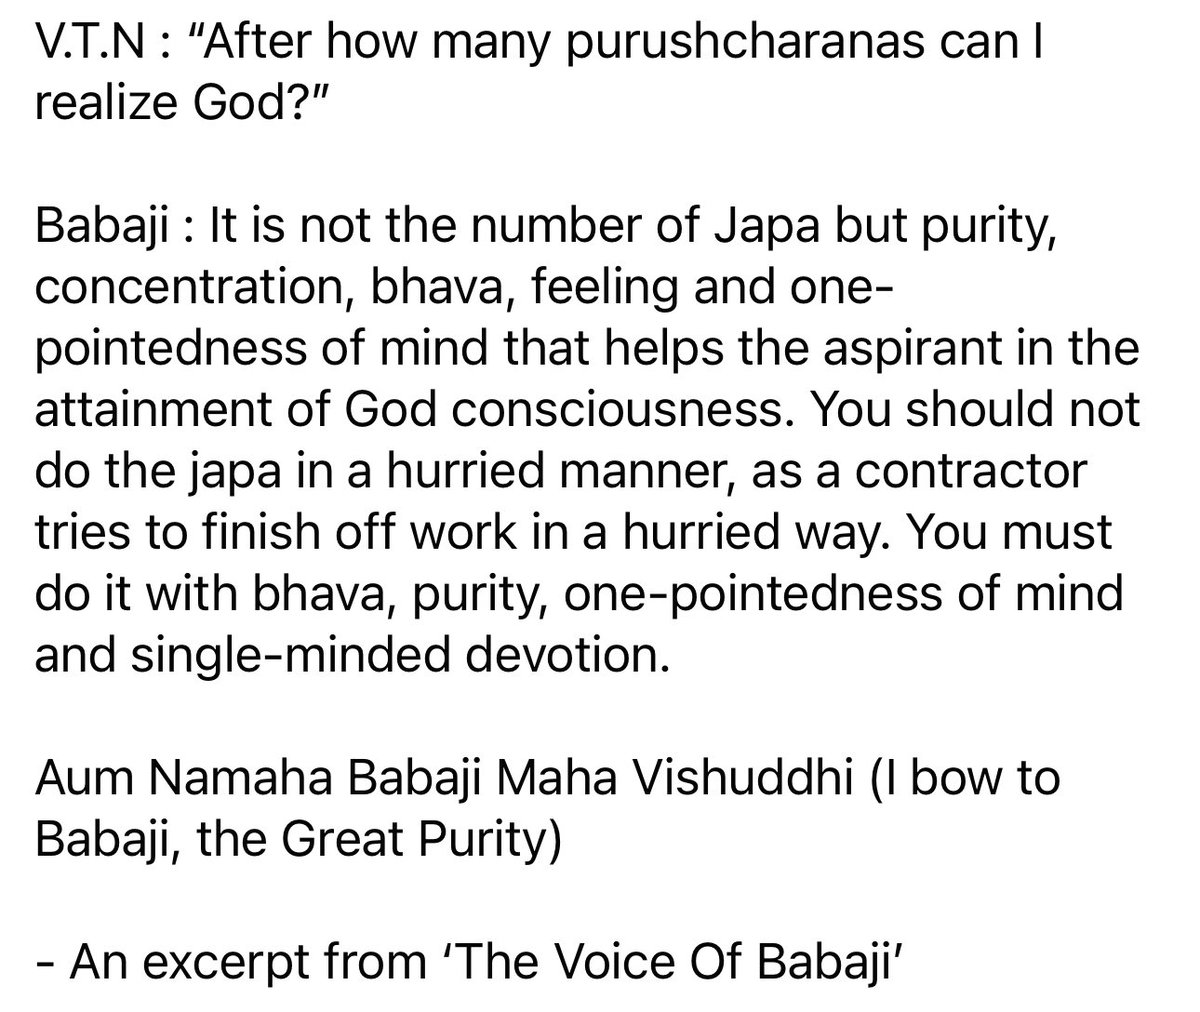 Babaji : It is not the number of Japa but purity, concentration, bhava, feeling and one-pointedness of mind that helps the aspirant in the attainment of God consciousness. You must do it with bhava, purity, one-pointedness of mind and devotion.
Aum Namaha Babaji Maha Vishuddhi!